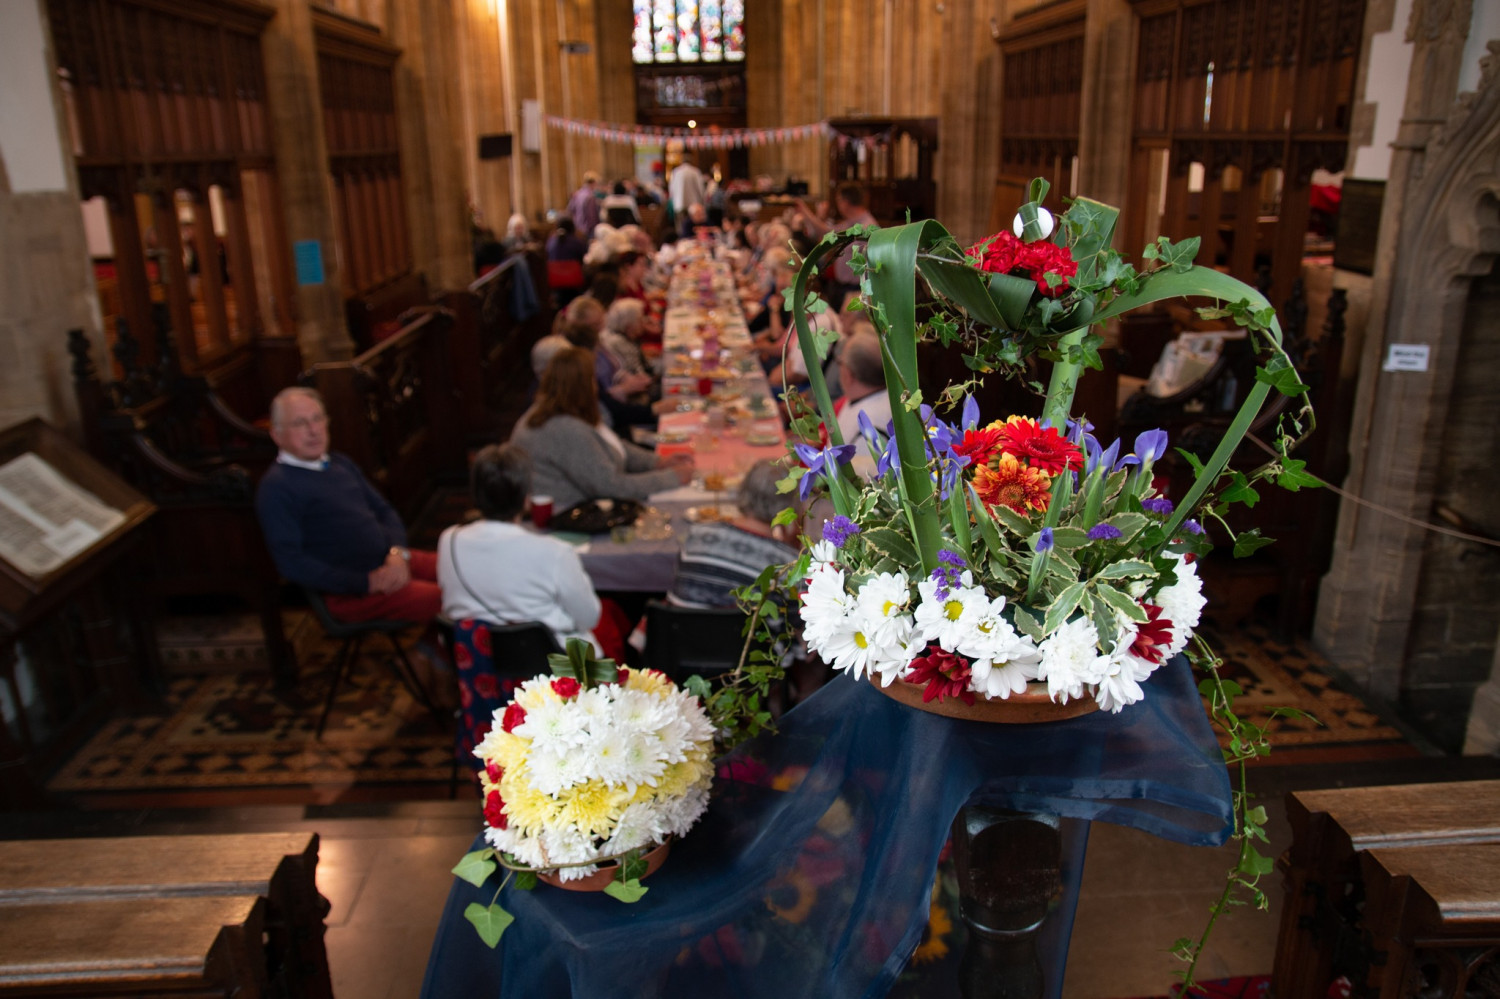 St John's Yeovil gathering with floral display